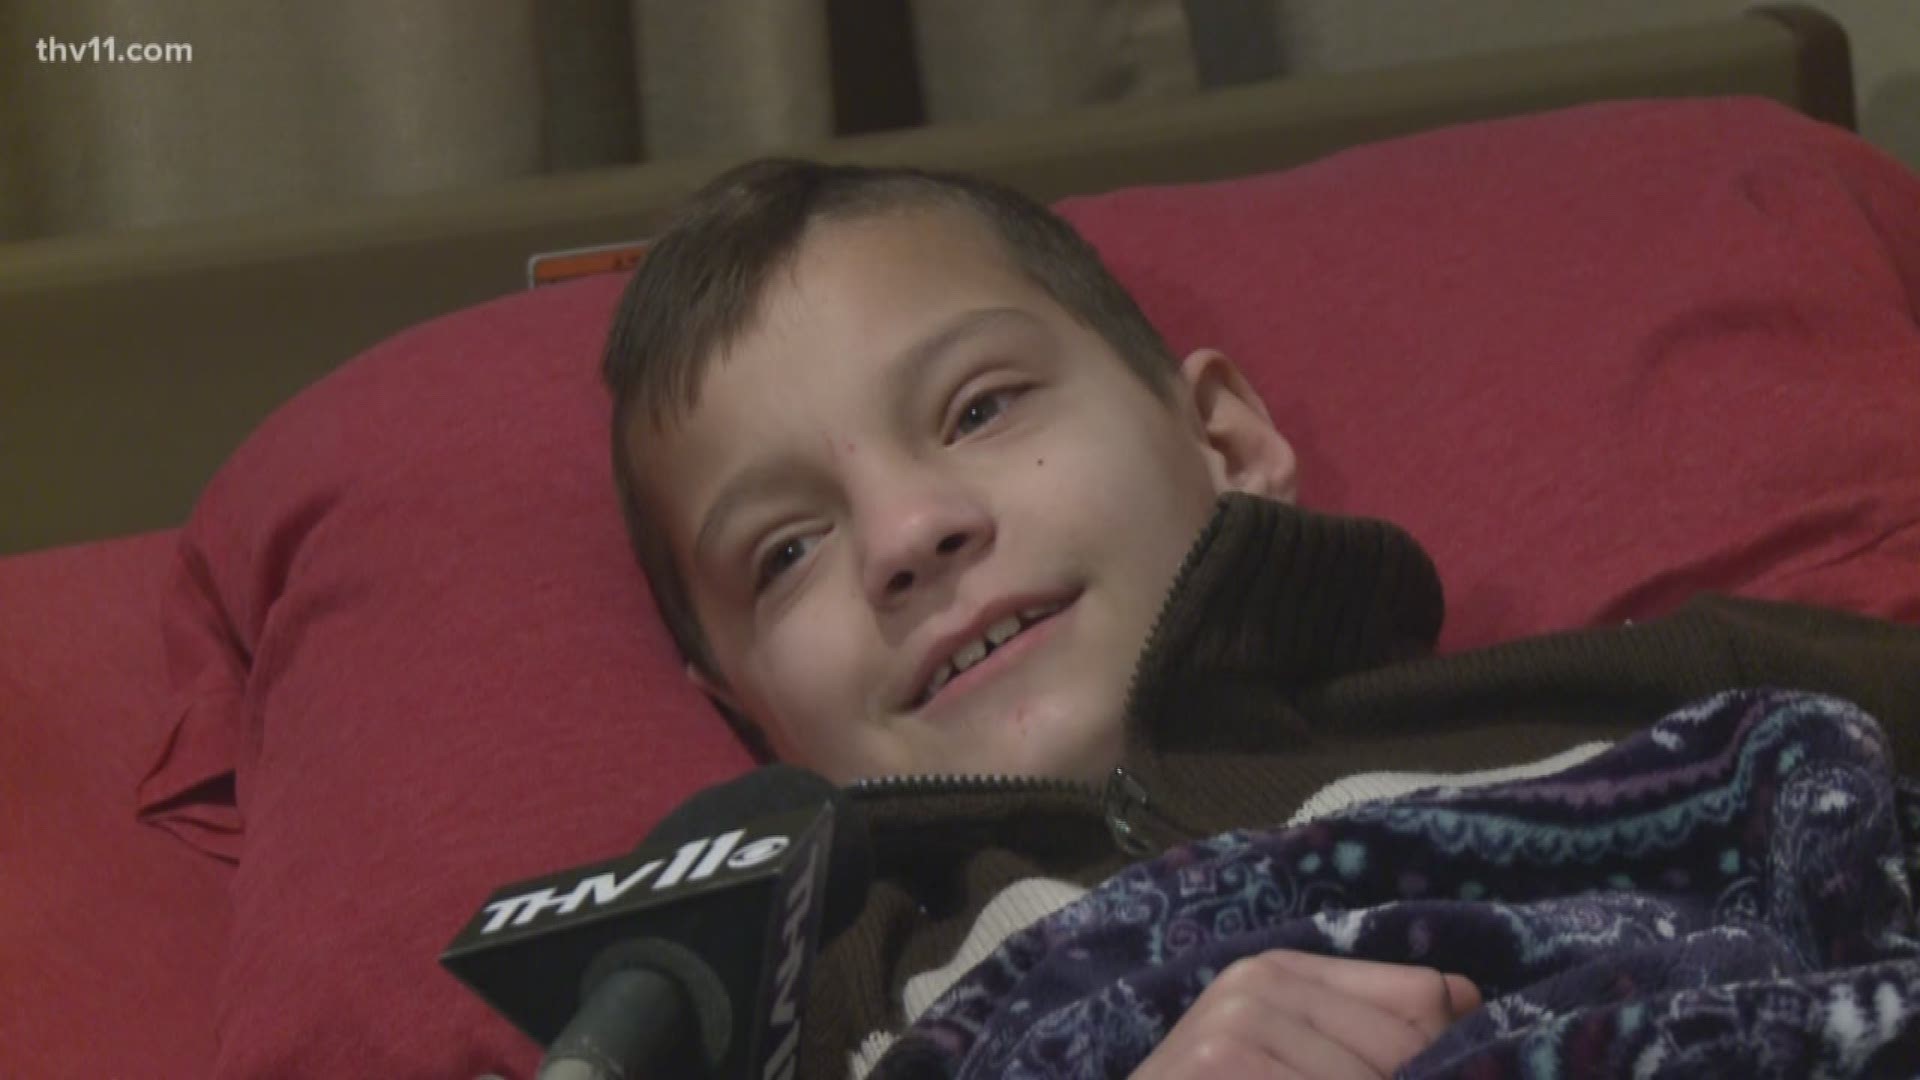 Central Arkansas is rallying behind a 9-year-old boy.